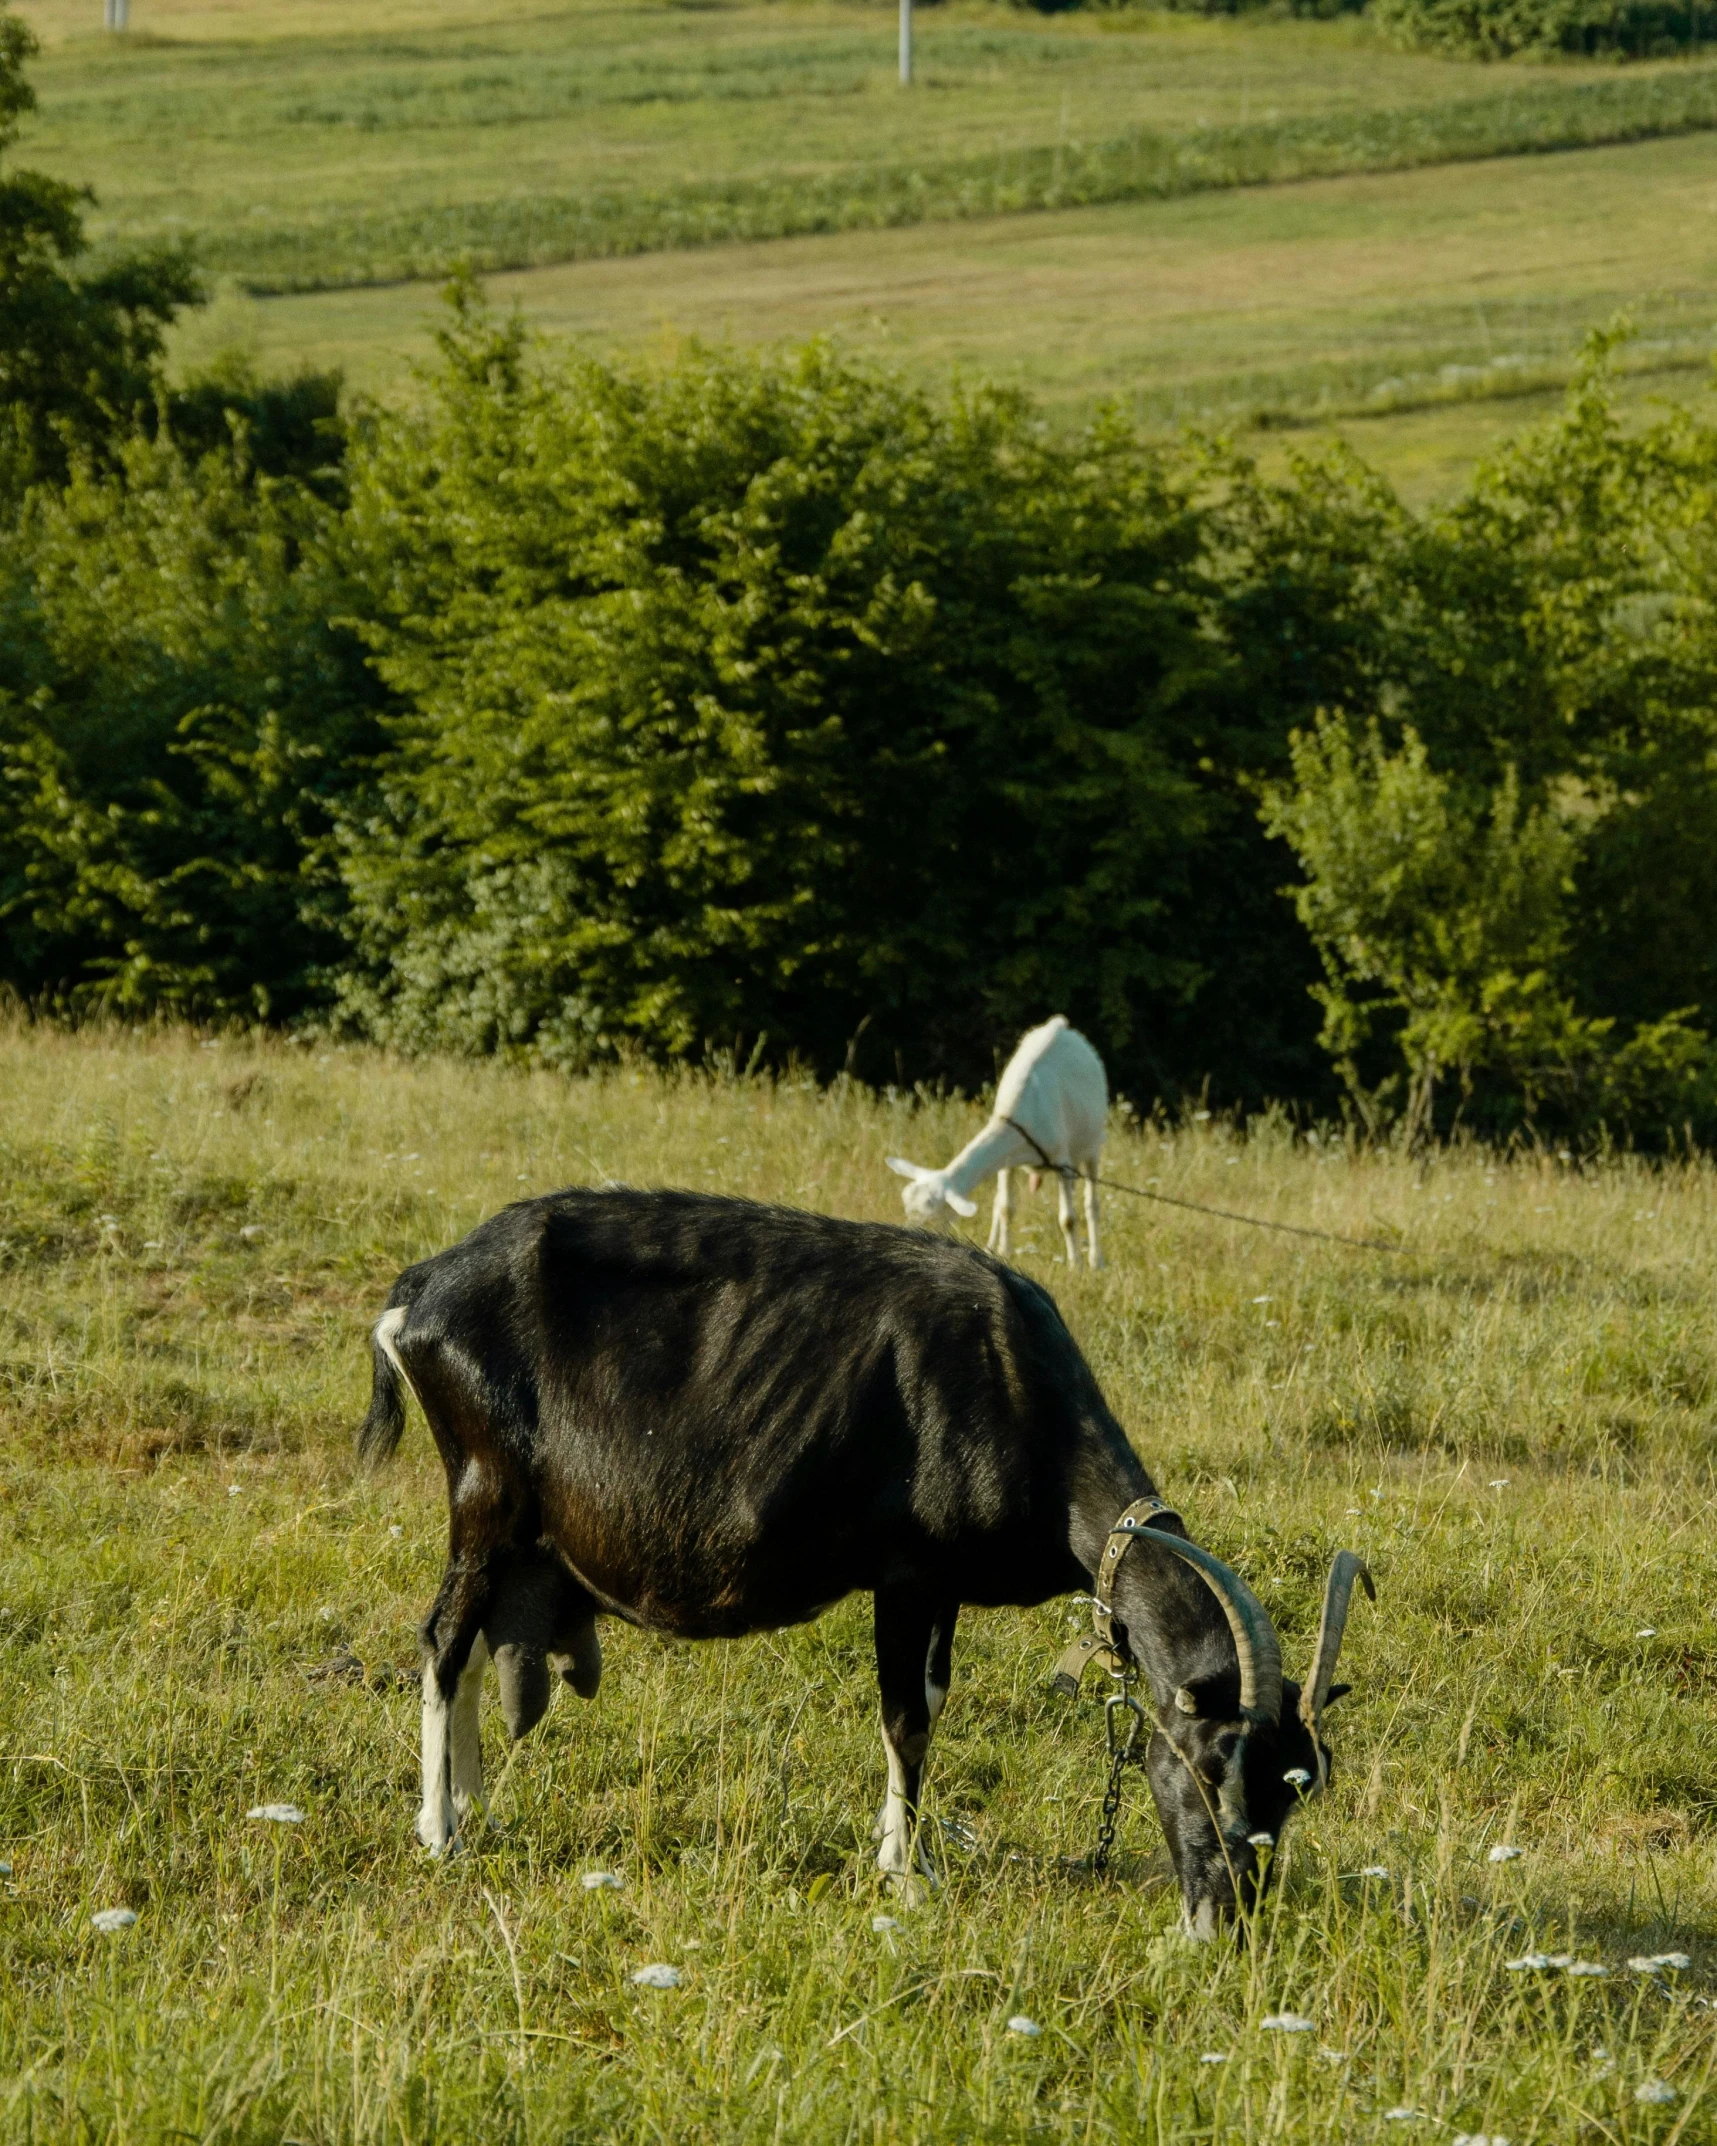 an animal with horns in a grassy field